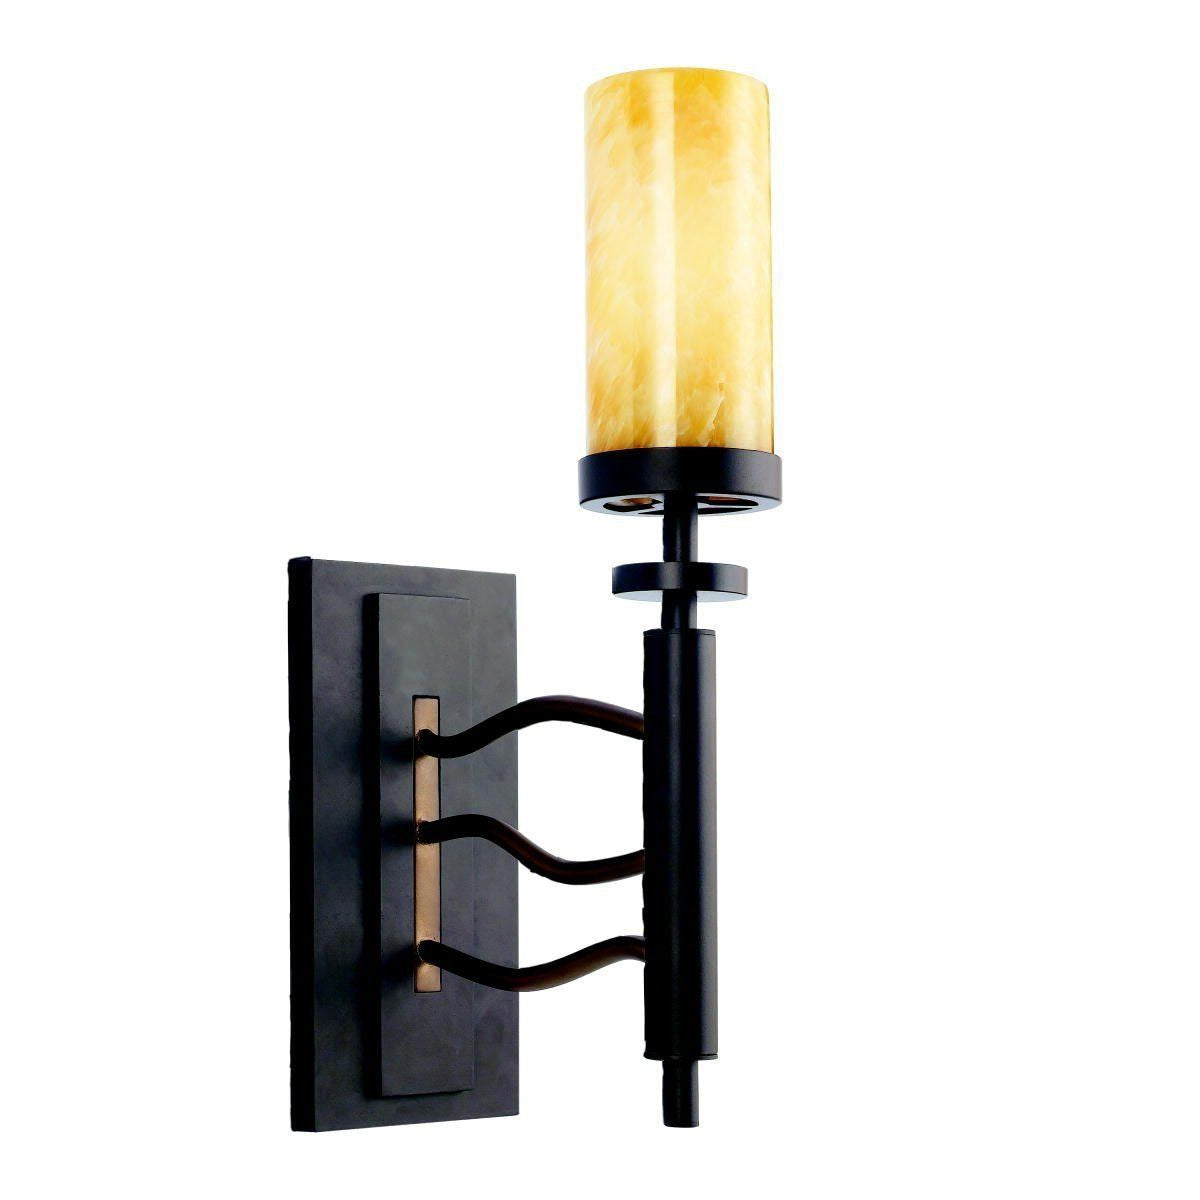 Kichler Lighting 45186OZ One Light Millry Collection Wall Sconce in Olde Bronze Finish